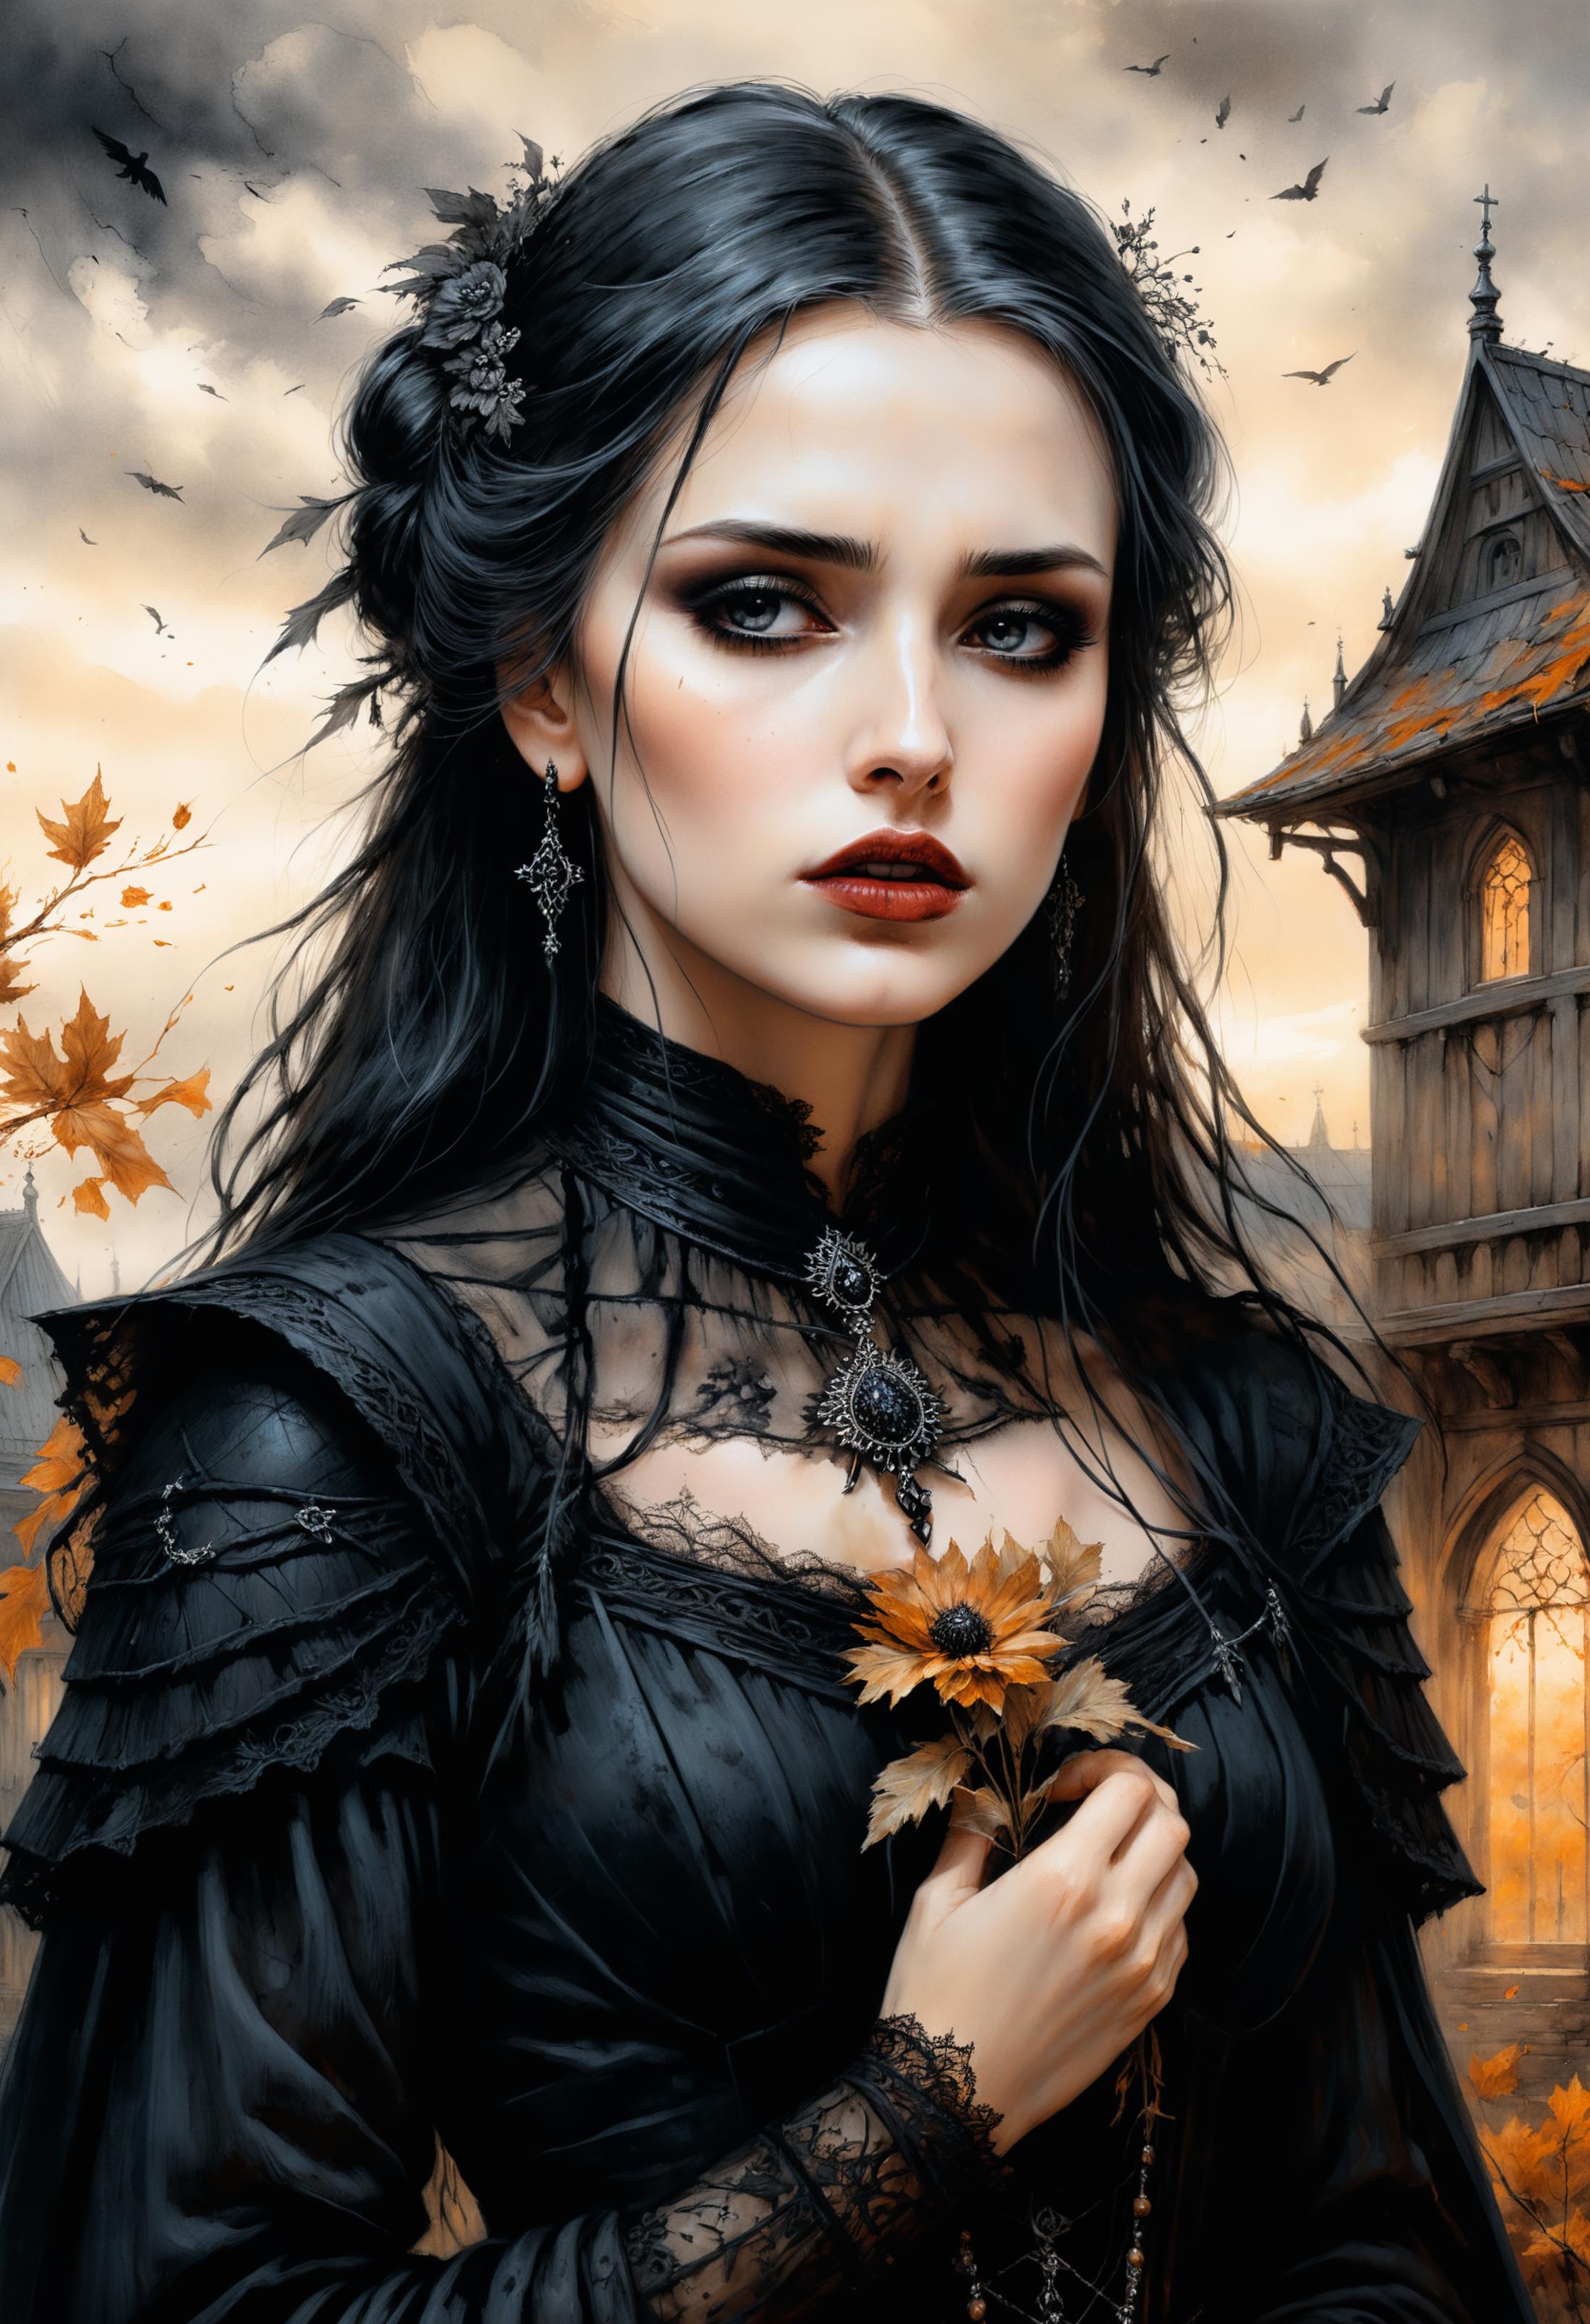 A lady with long dark hair holding a yellow flower in front of a castle.